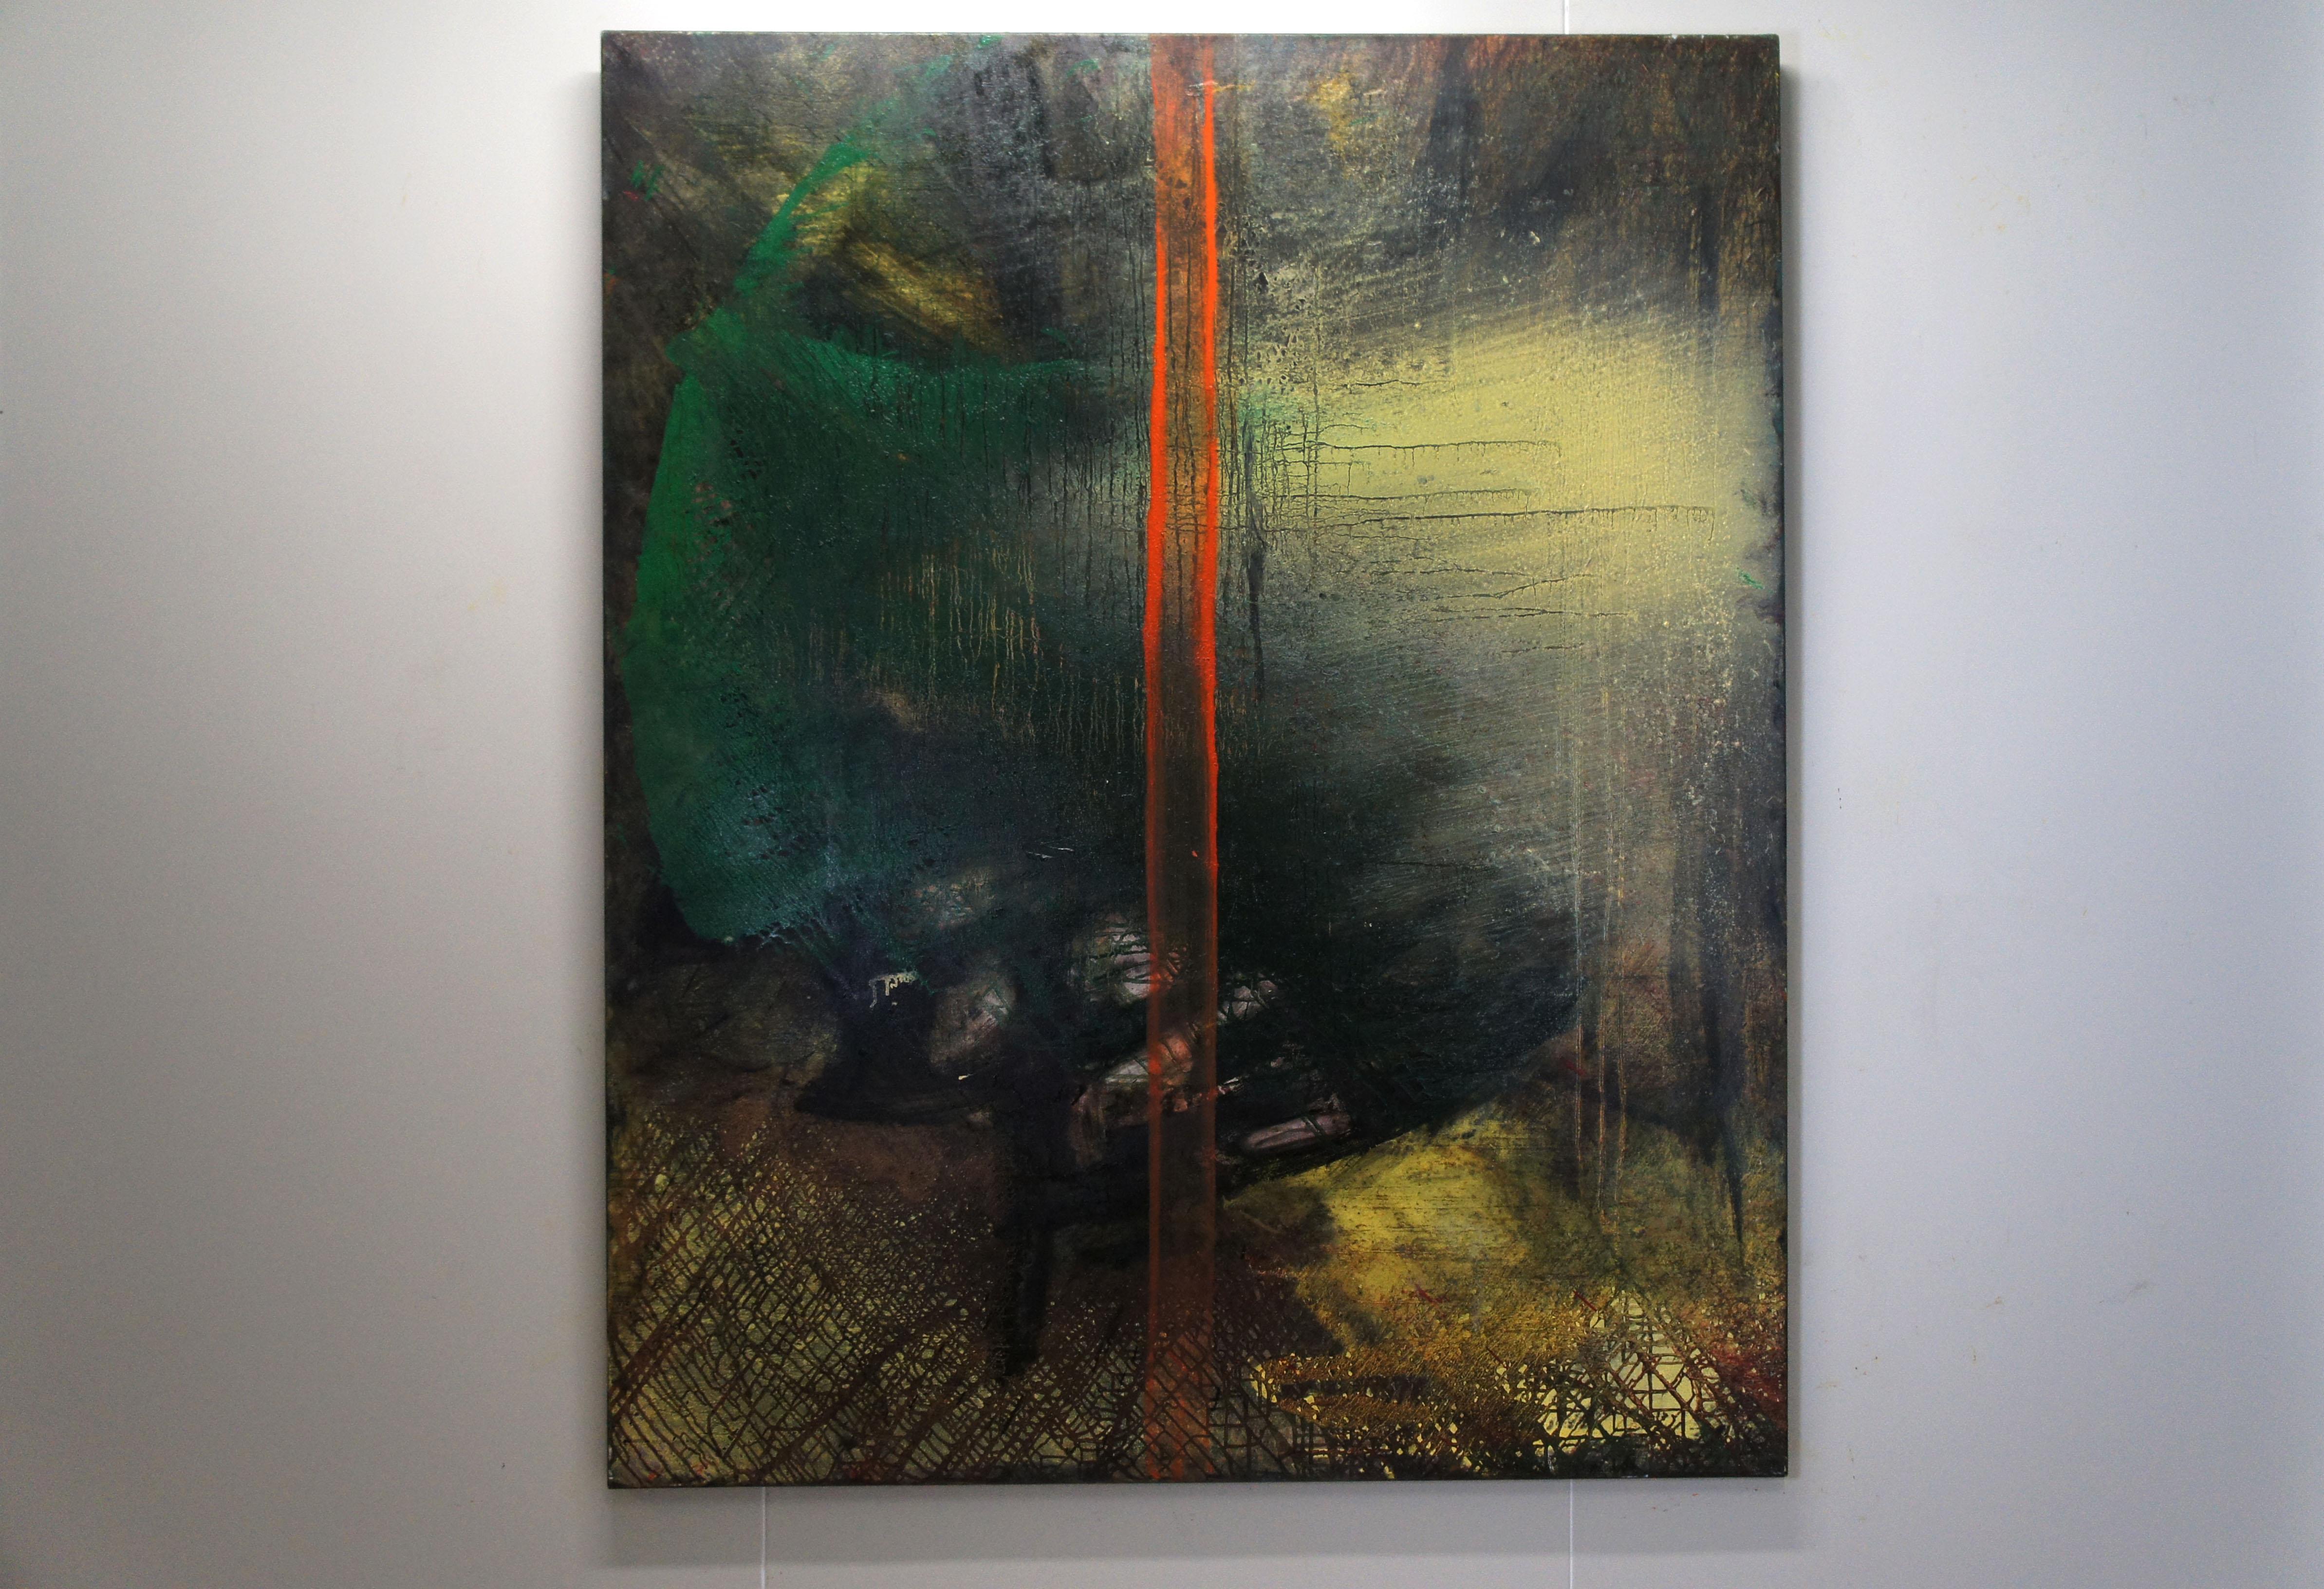 Memory Landscape no33 - Oil Absrtact Painting, 2021  - Black Abstract Painting by Hsu Tung Lung